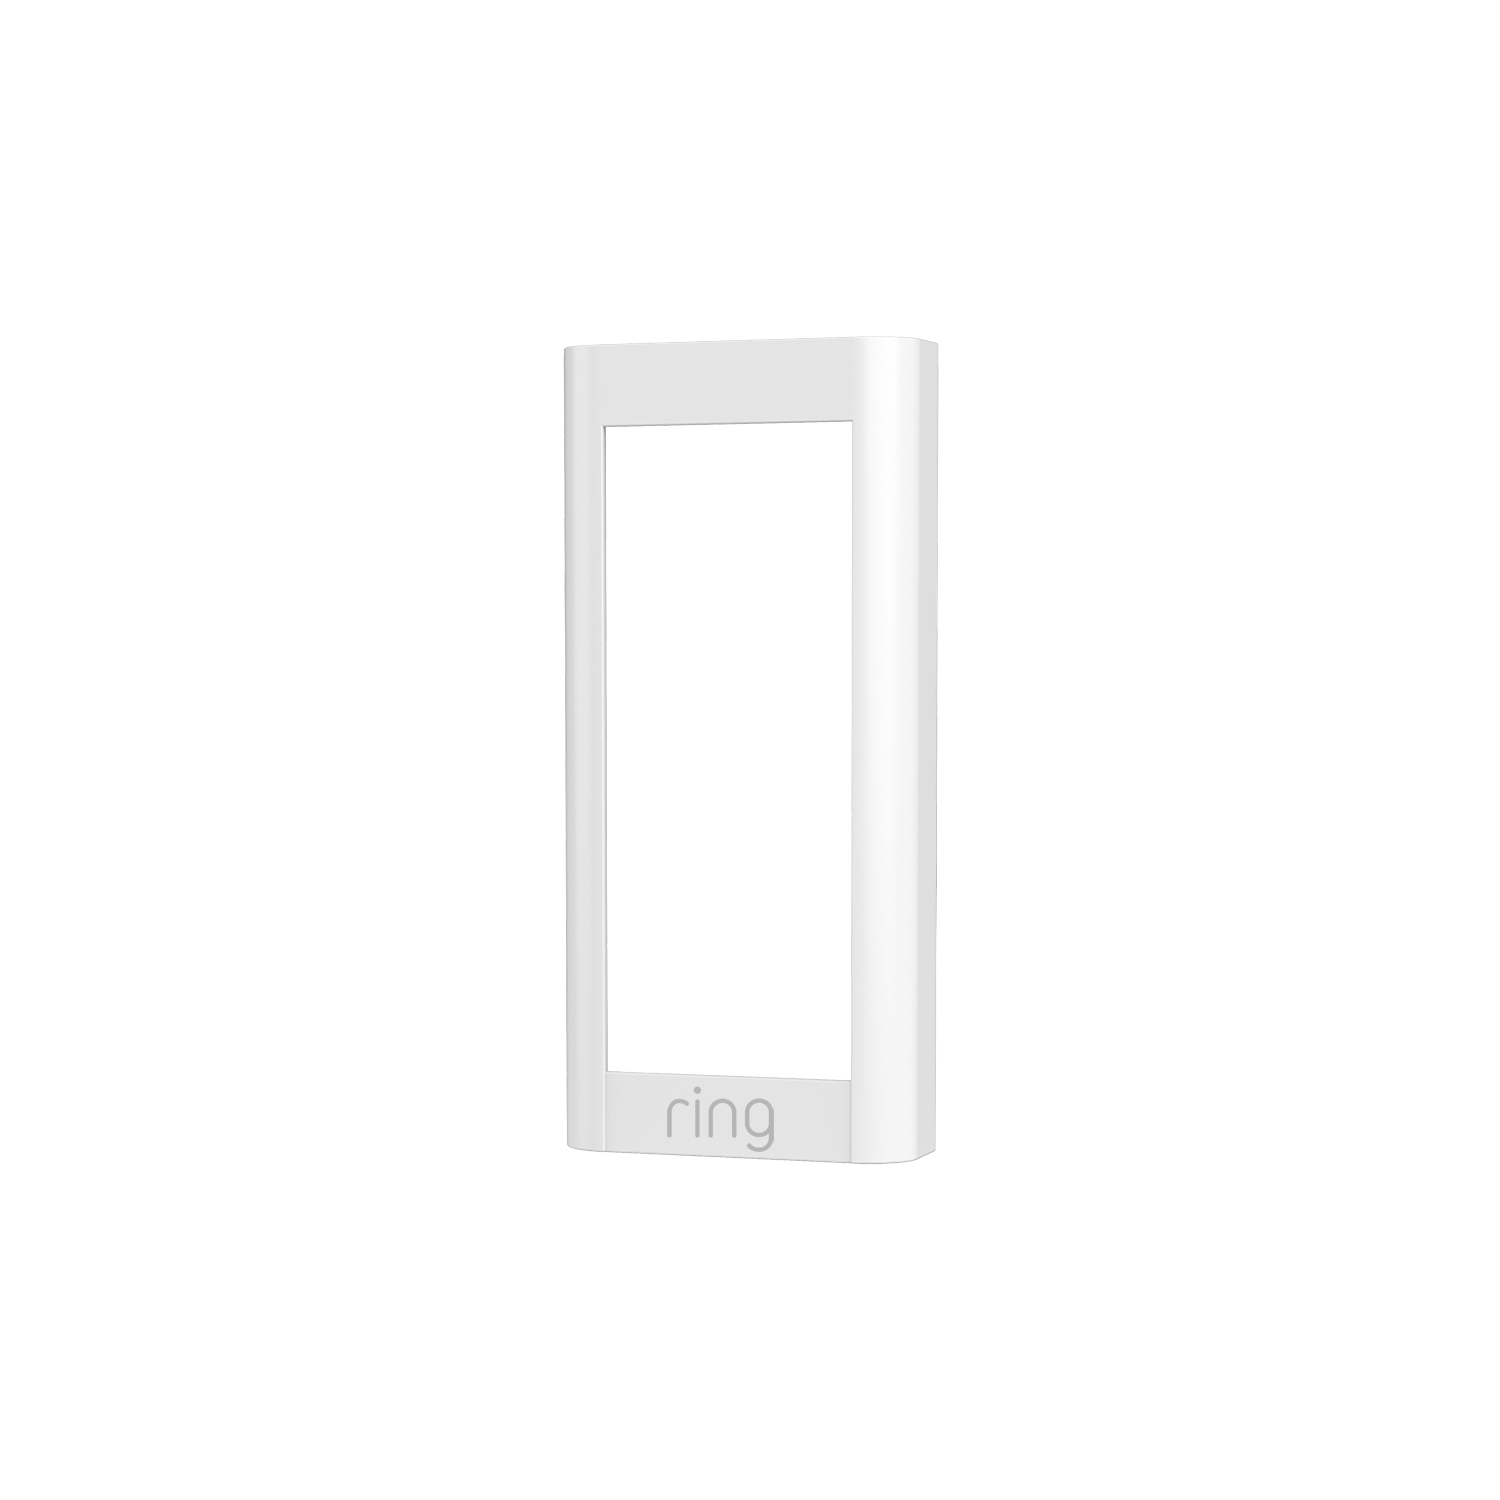 Interchangeable Faceplate (for Video Doorbell Wired) - White